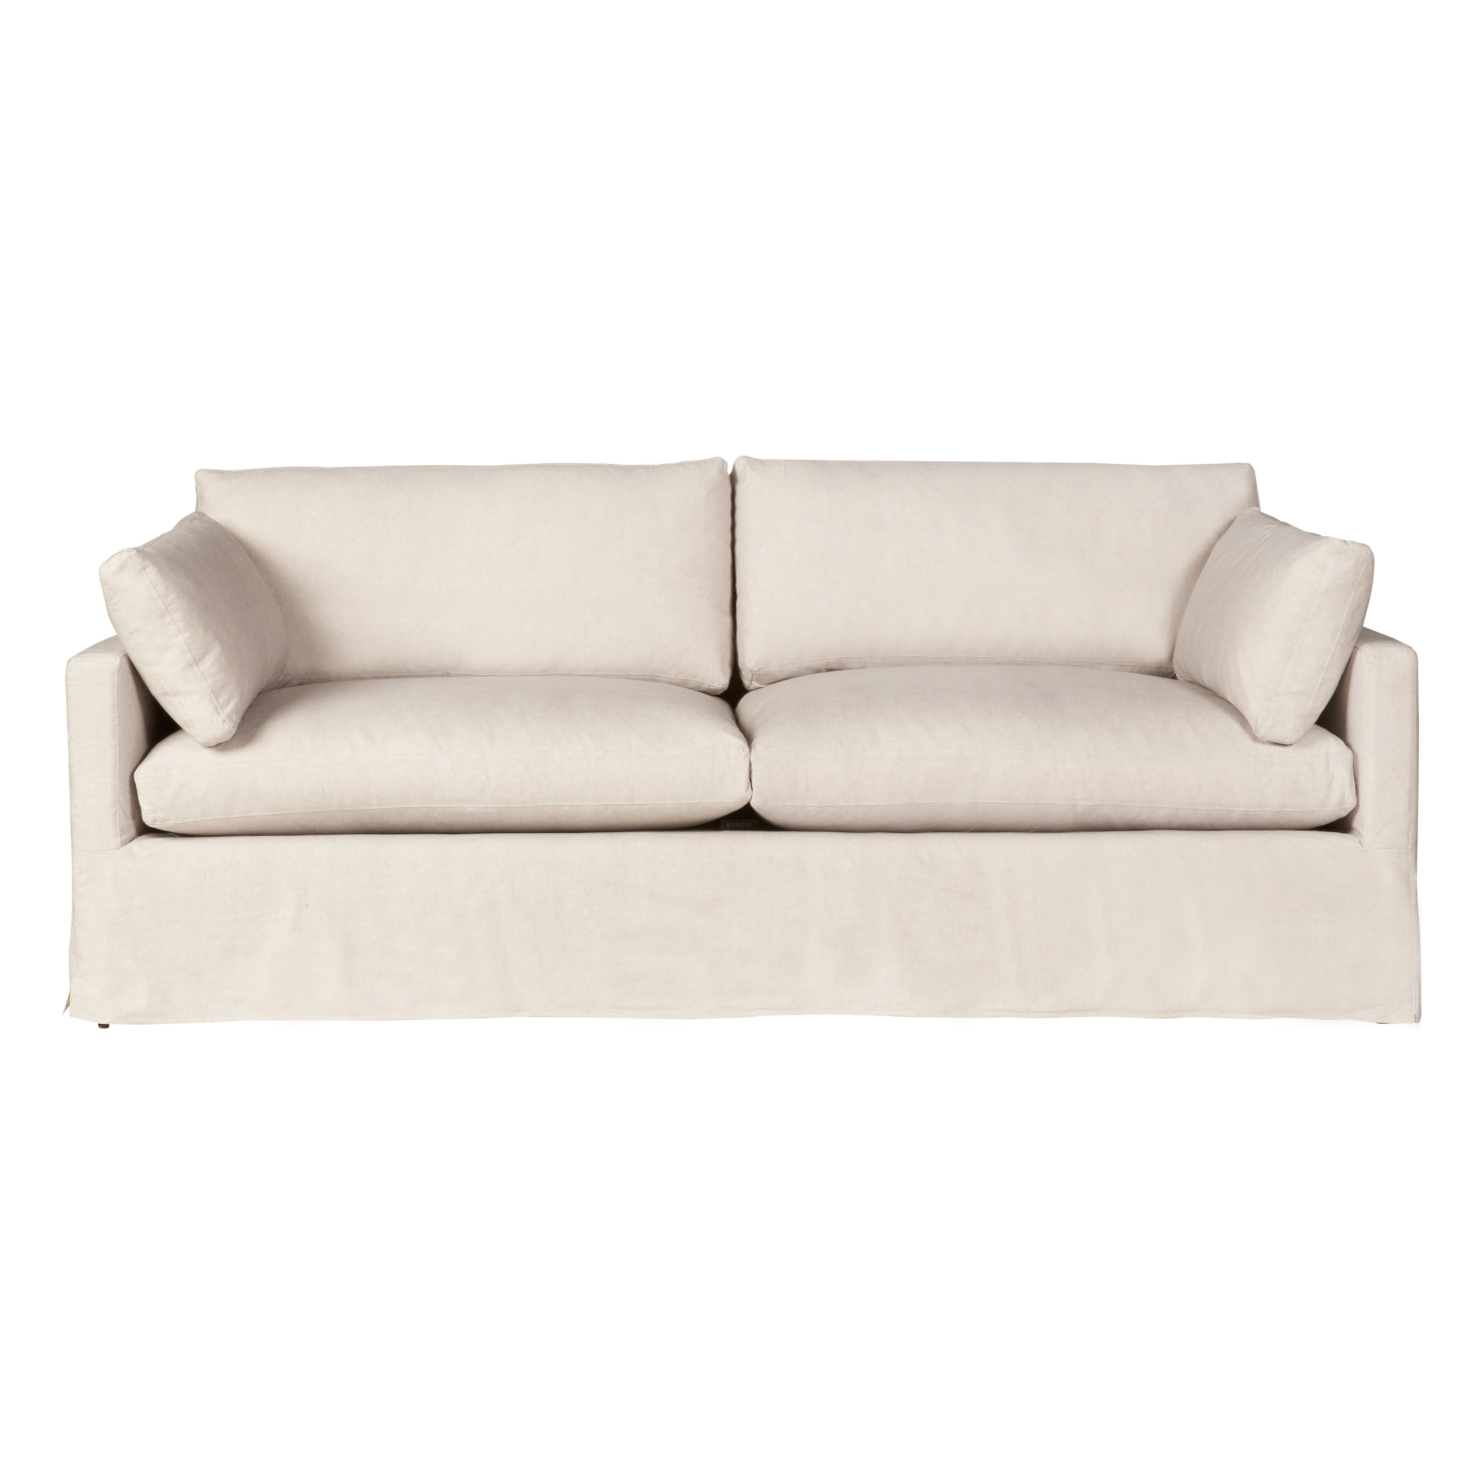 78"w x 31"h x 40"d Seat Space: 56"w x 26"d x 20"hThis Louis sofa is a shop favorite -- simply beautiful and so comfortable for the modern family!  The Louis Sofa blends modern and coastal aesthetics with clean lines, a straight skirt, and a subtle 2" slit. It’s two-over-two cushions provide the perfect seating to catch up with old friends or entertain new ones. Photographed in Logan Silver.